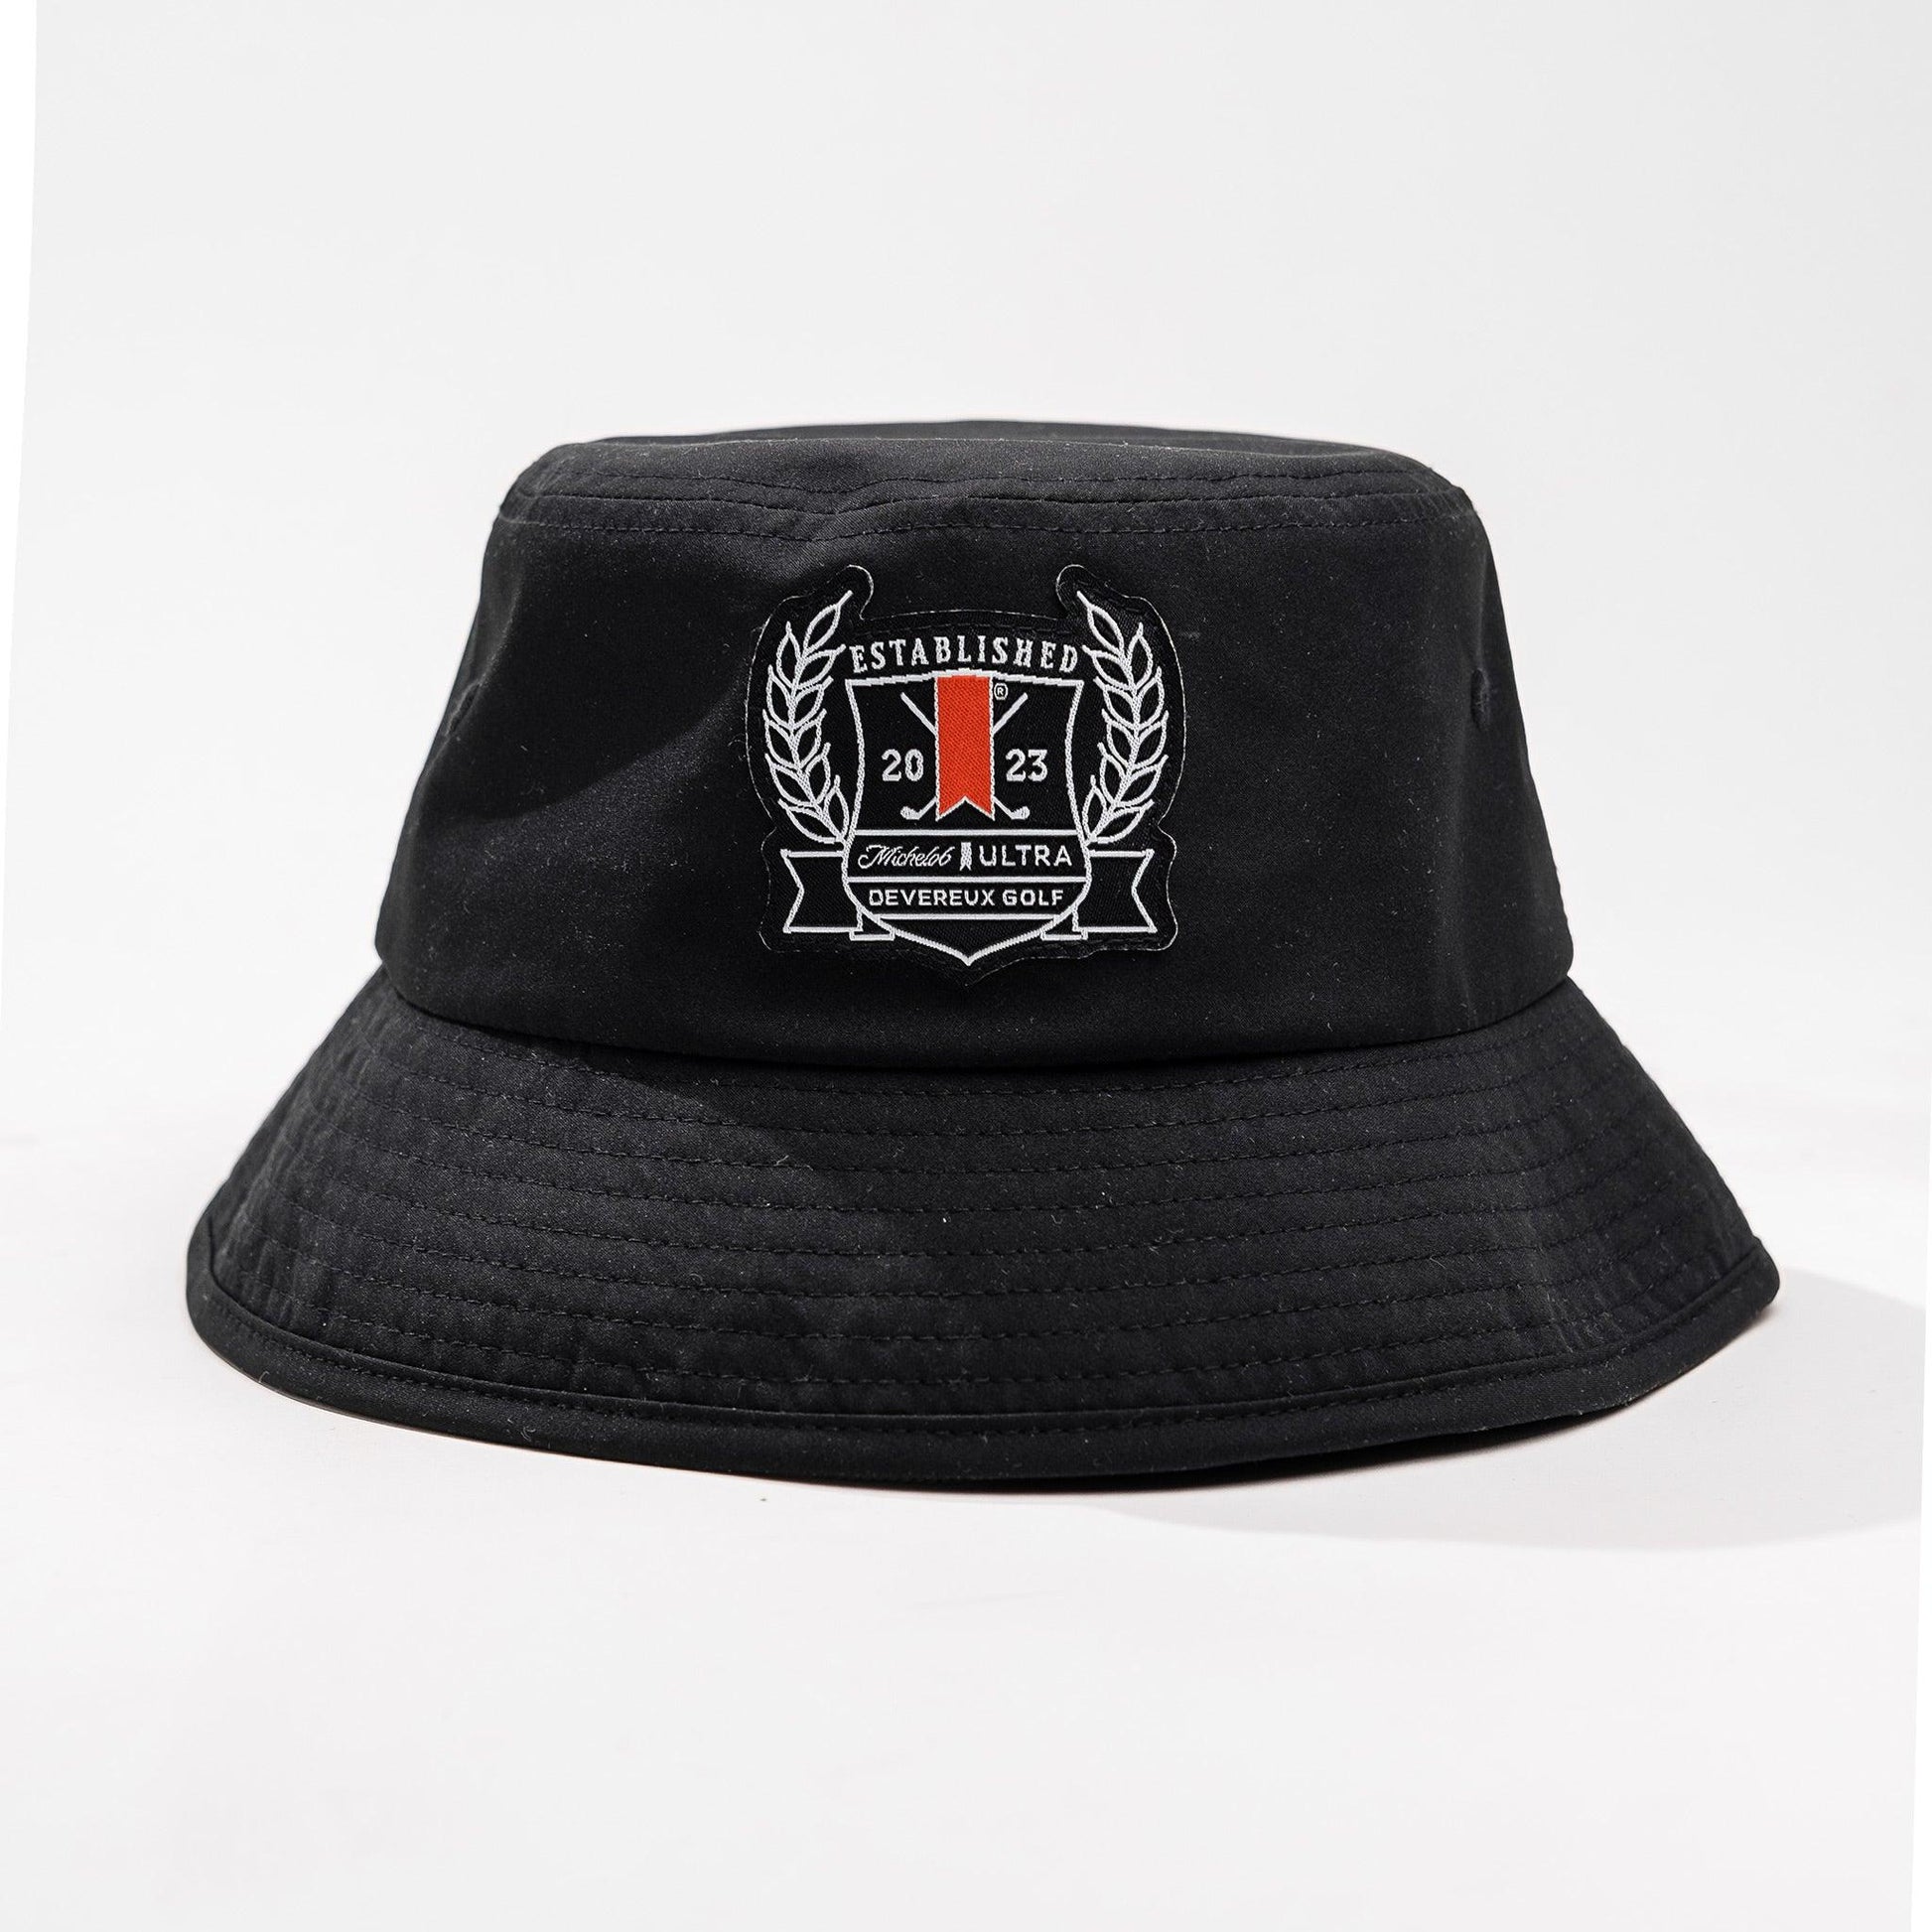 Black bucket hat with Michelob ULTRA Devereaux Golf patch